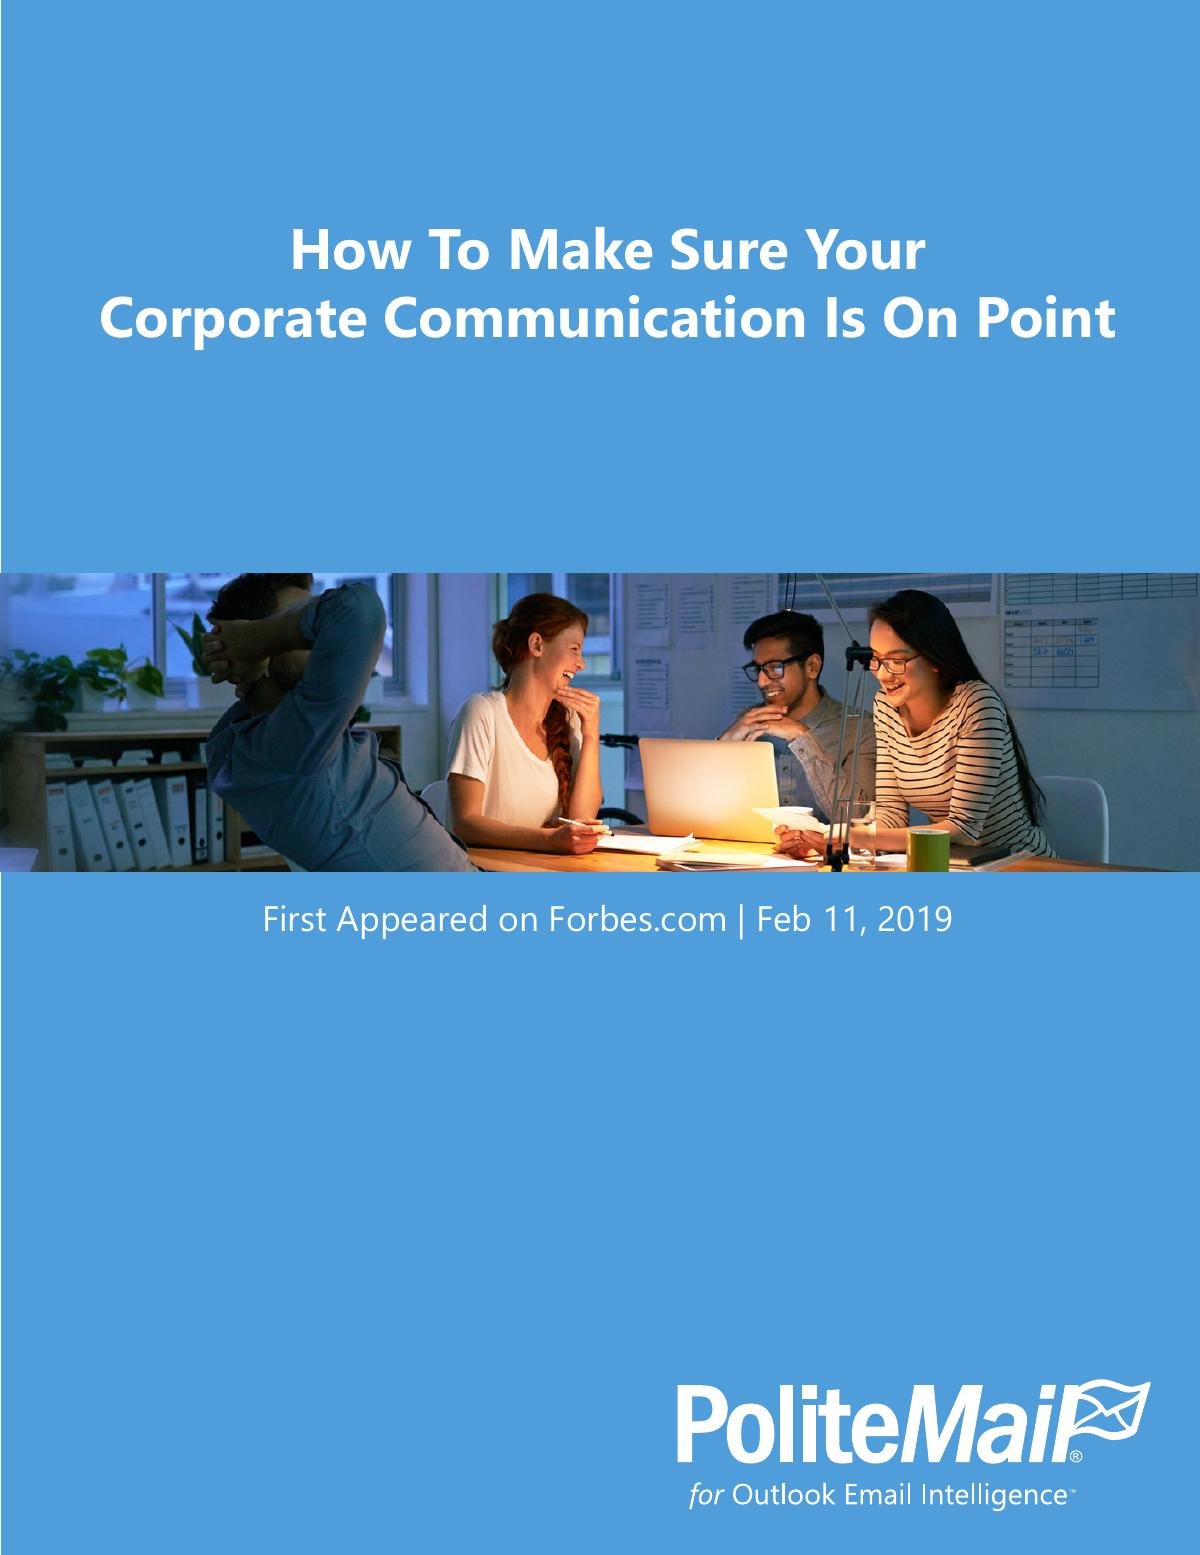 How To Make Sure Your Corporate Communication Is On Point